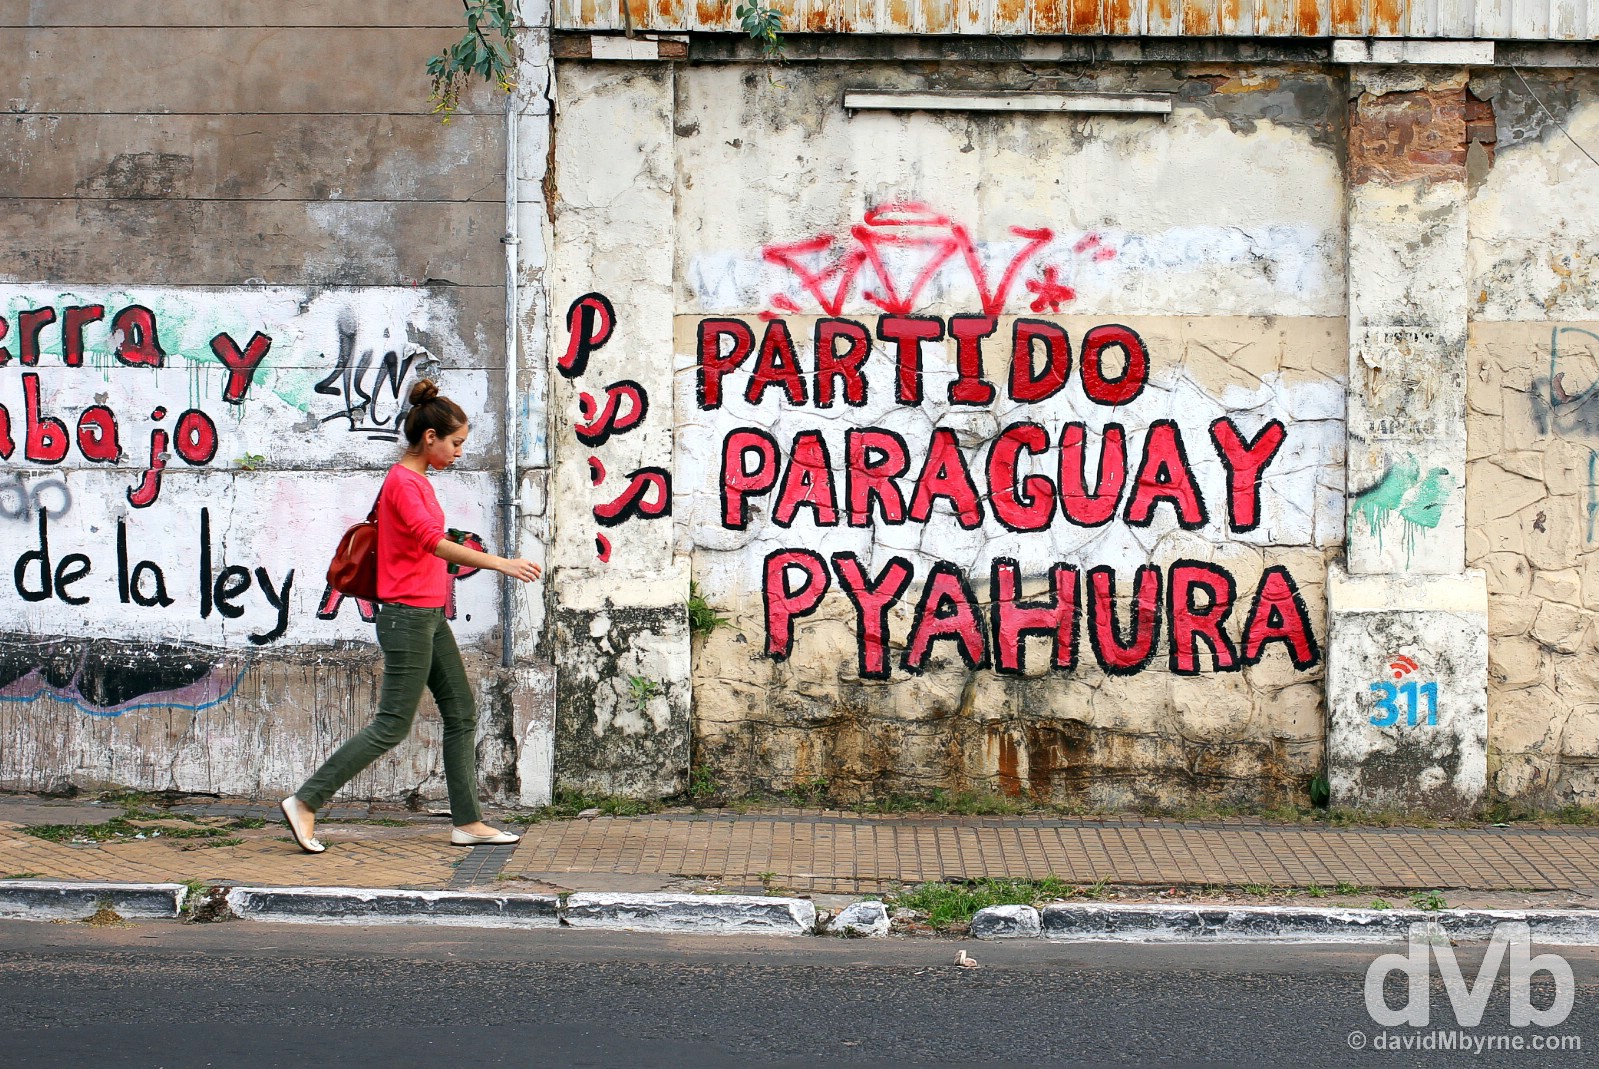 On the streets of the Paraguayan capital of Asuncion. September 9, 2015.  